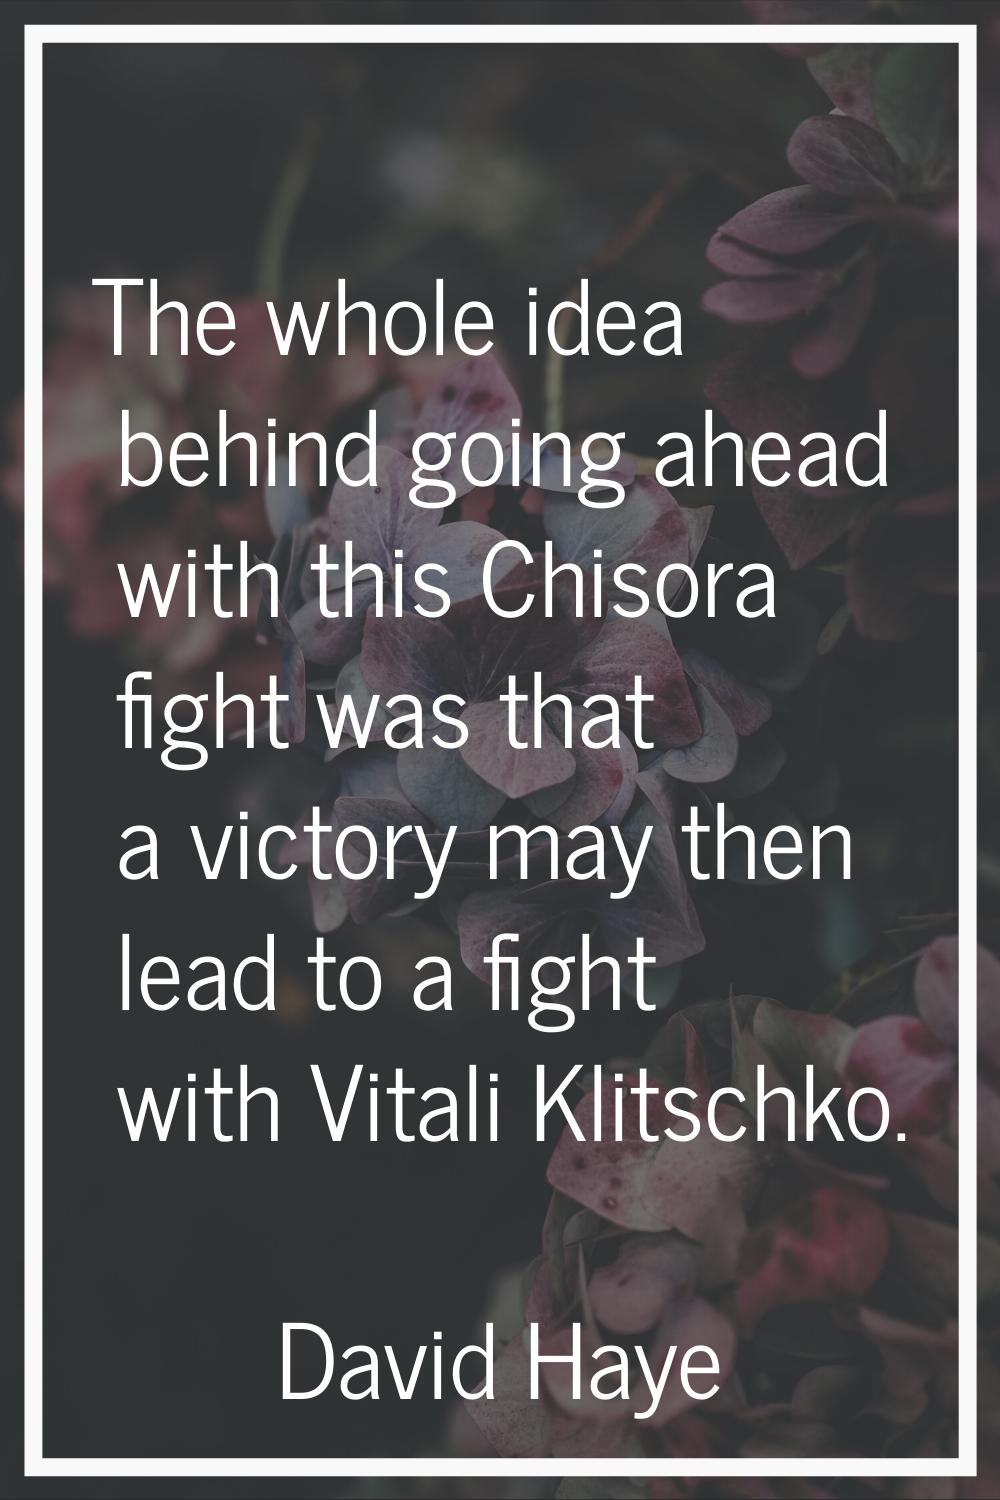 The whole idea behind going ahead with this Chisora fight was that a victory may then lead to a fig